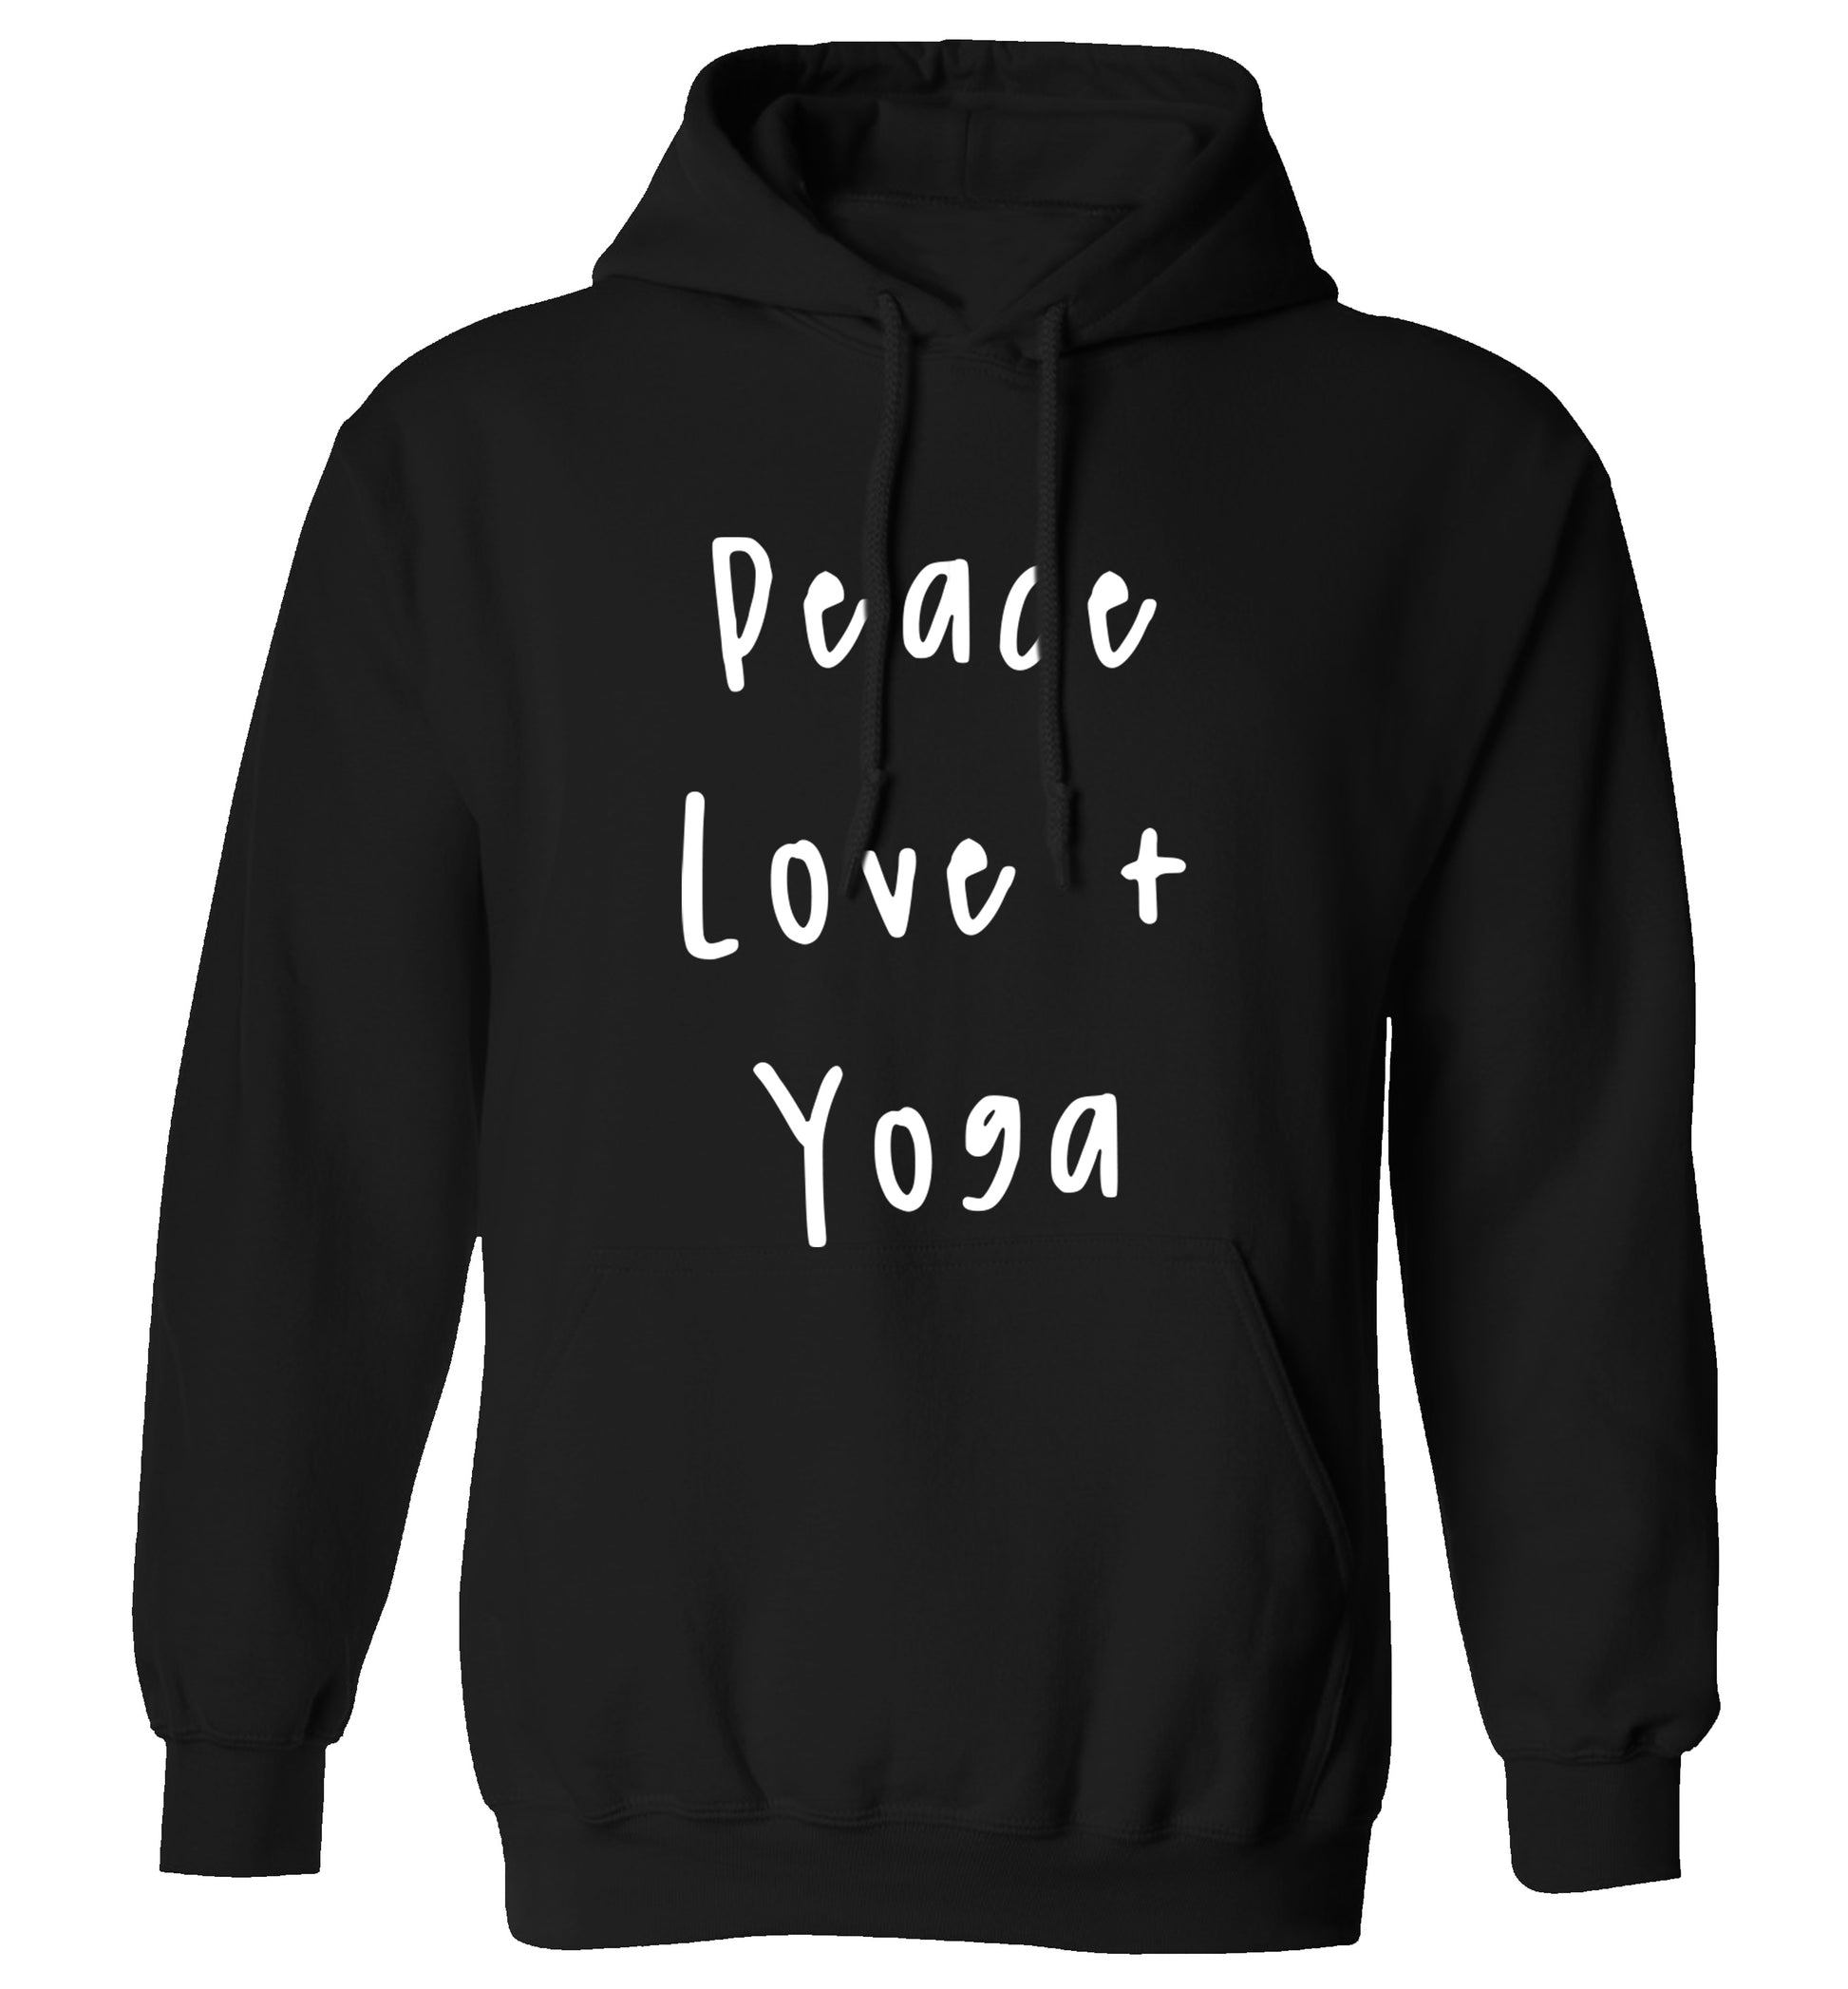 Peace love and yoga adults unisex black hoodie 2XL